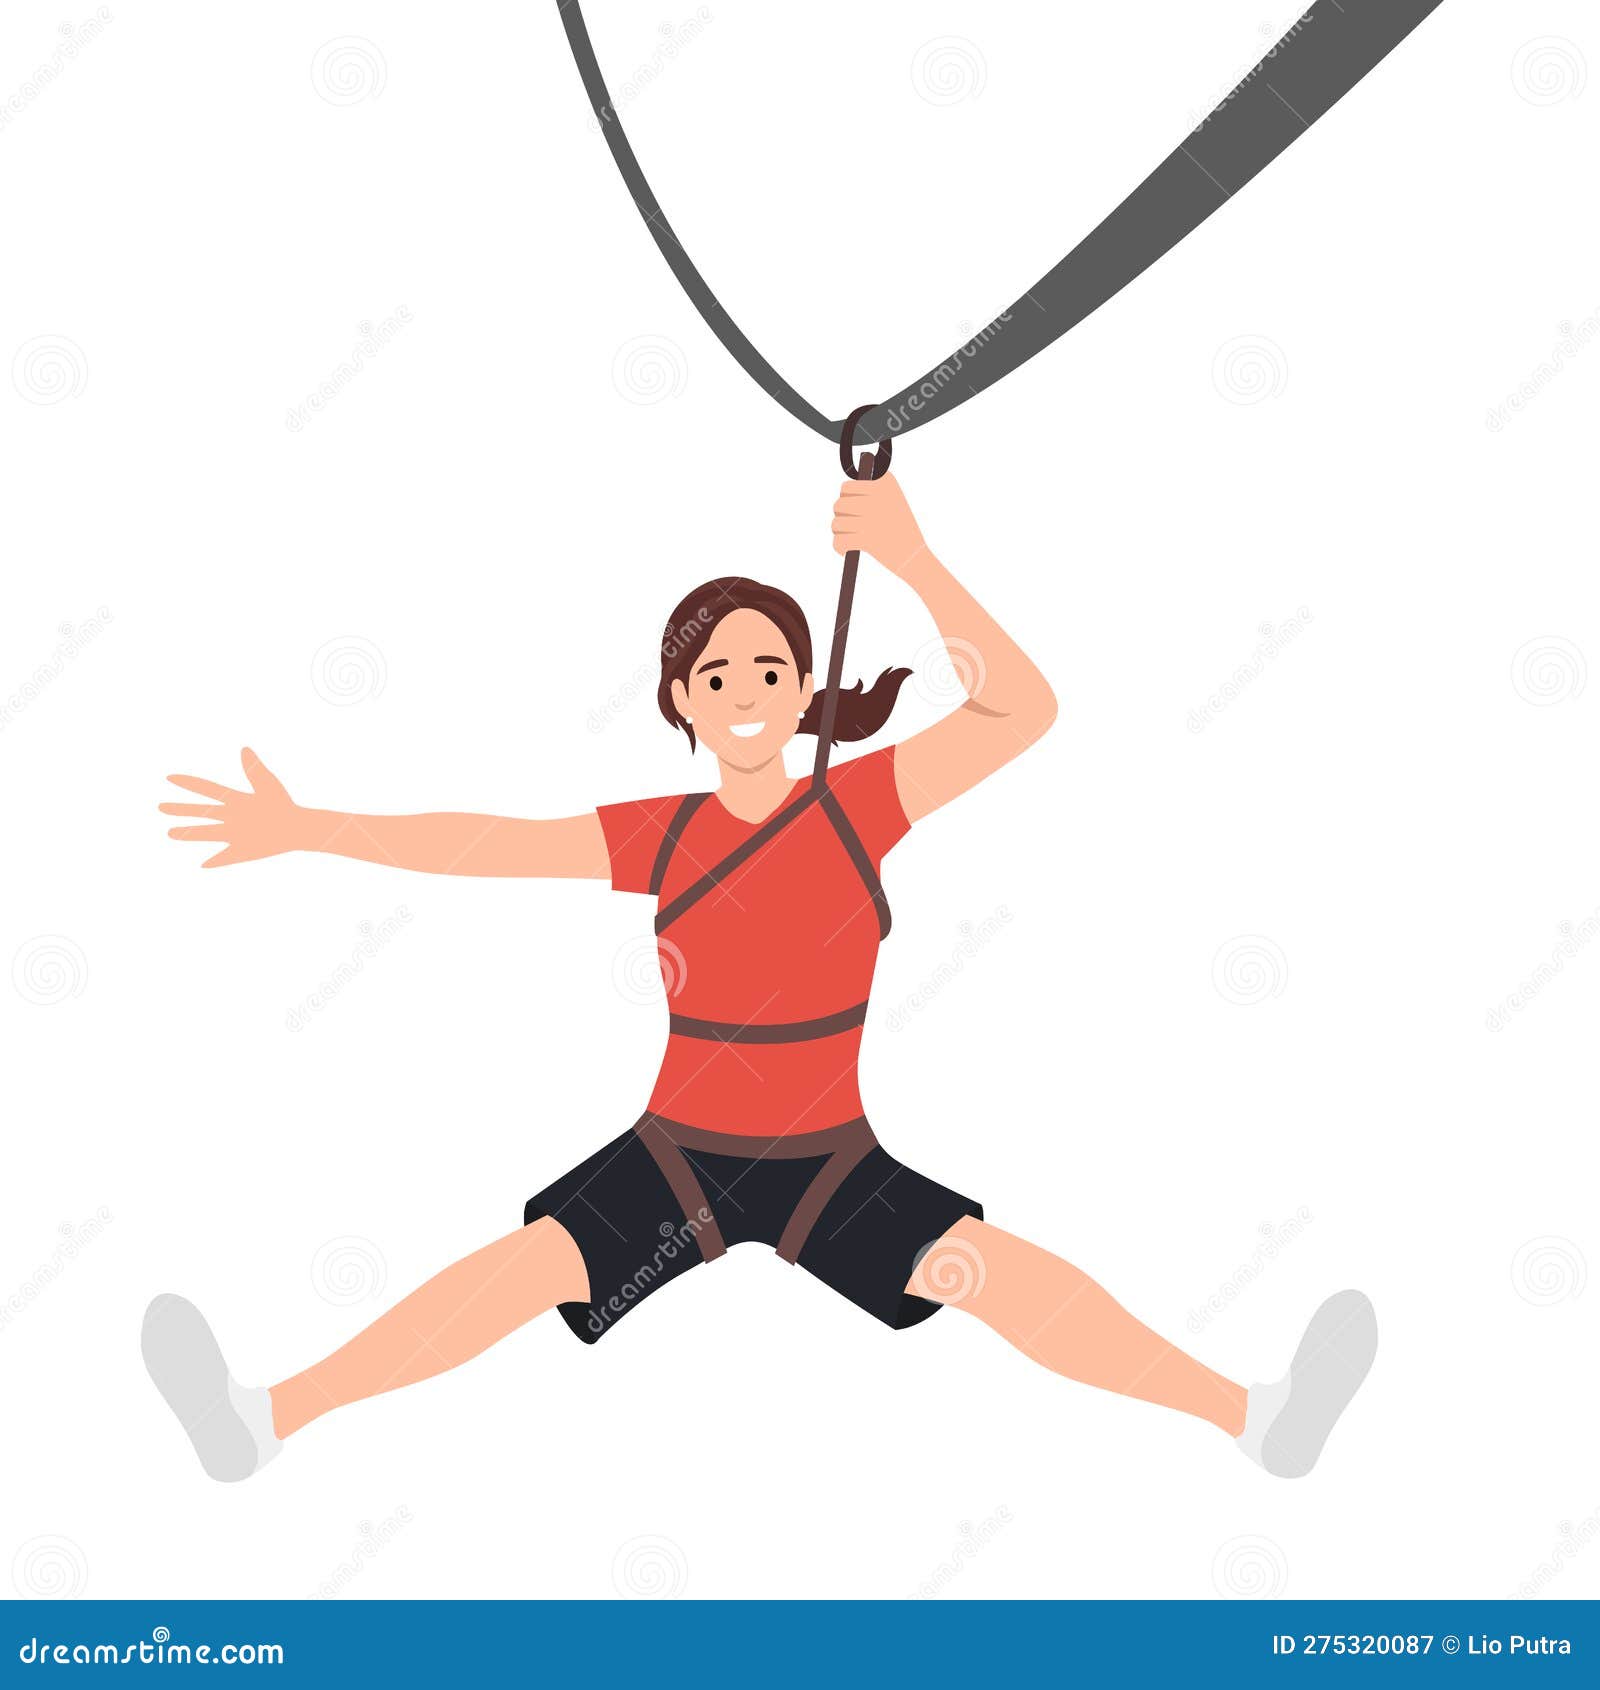 Woman Doing Rope Slide Ride. Hand on Line Over Crossing Cliff. Zip Line Rope  Concept Banner Stock Illustration - Illustration of young, woman: 275320087